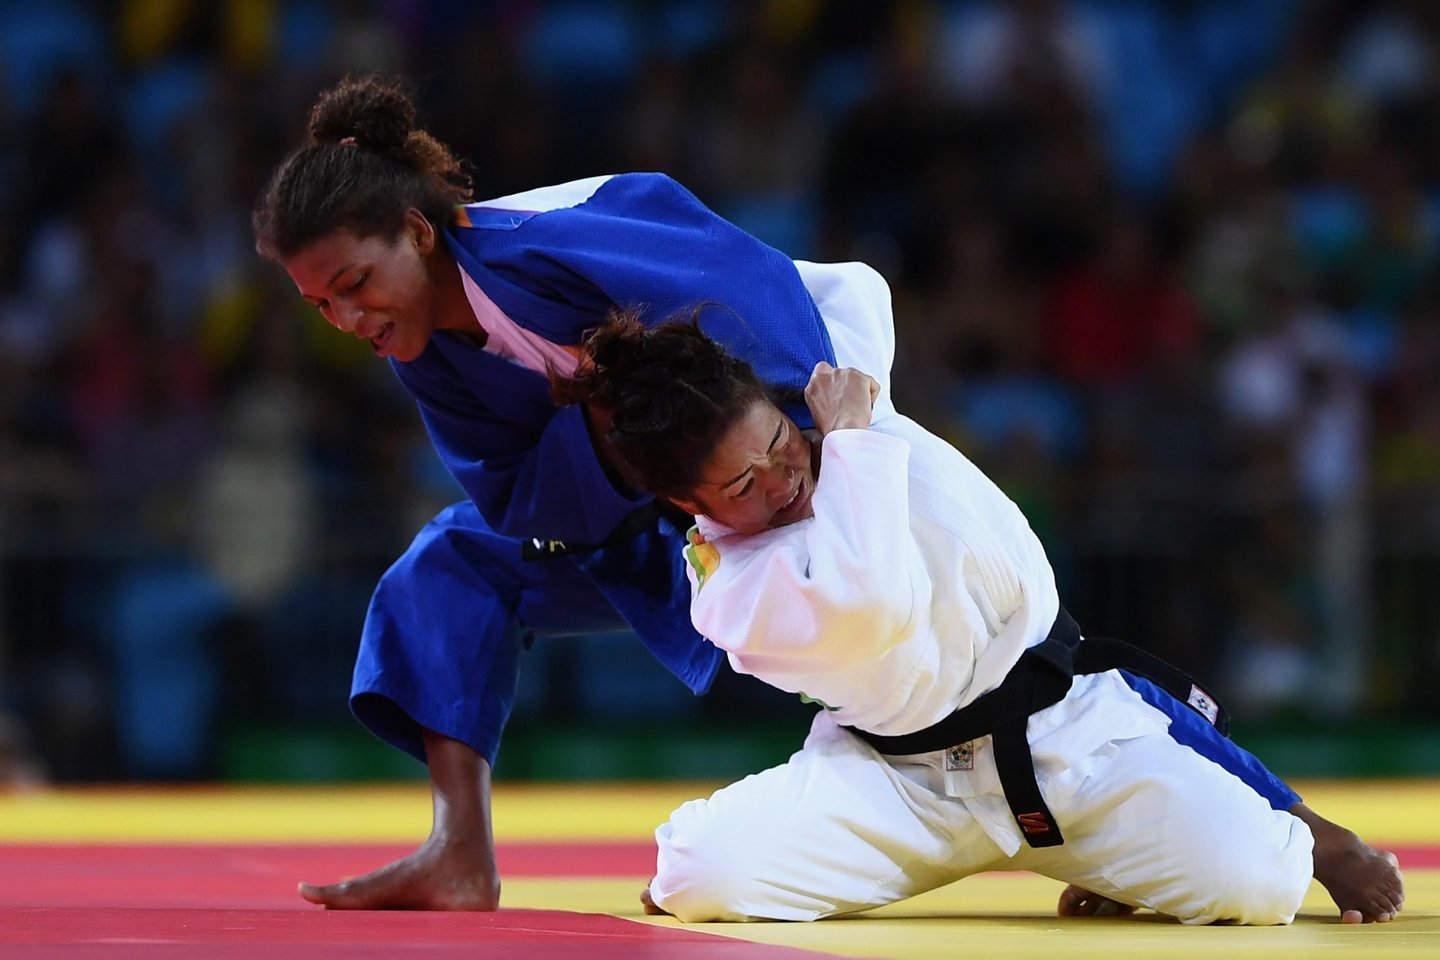 RIO DE JANEIRO, BRAZIL - AUGUST 08: Rafaela Silva of Brazil (blue) competes against Sumiya Dorjsuren of Mongolia in the Women's -57 kg Final - Gold Medal Contest on Day 3 of the Rio 2016 Olympic Games at Carioca Arena 2 on August 8, 2016 in Rio de Janeiro, Brazil. (Photo by David Ramos/Getty Images)